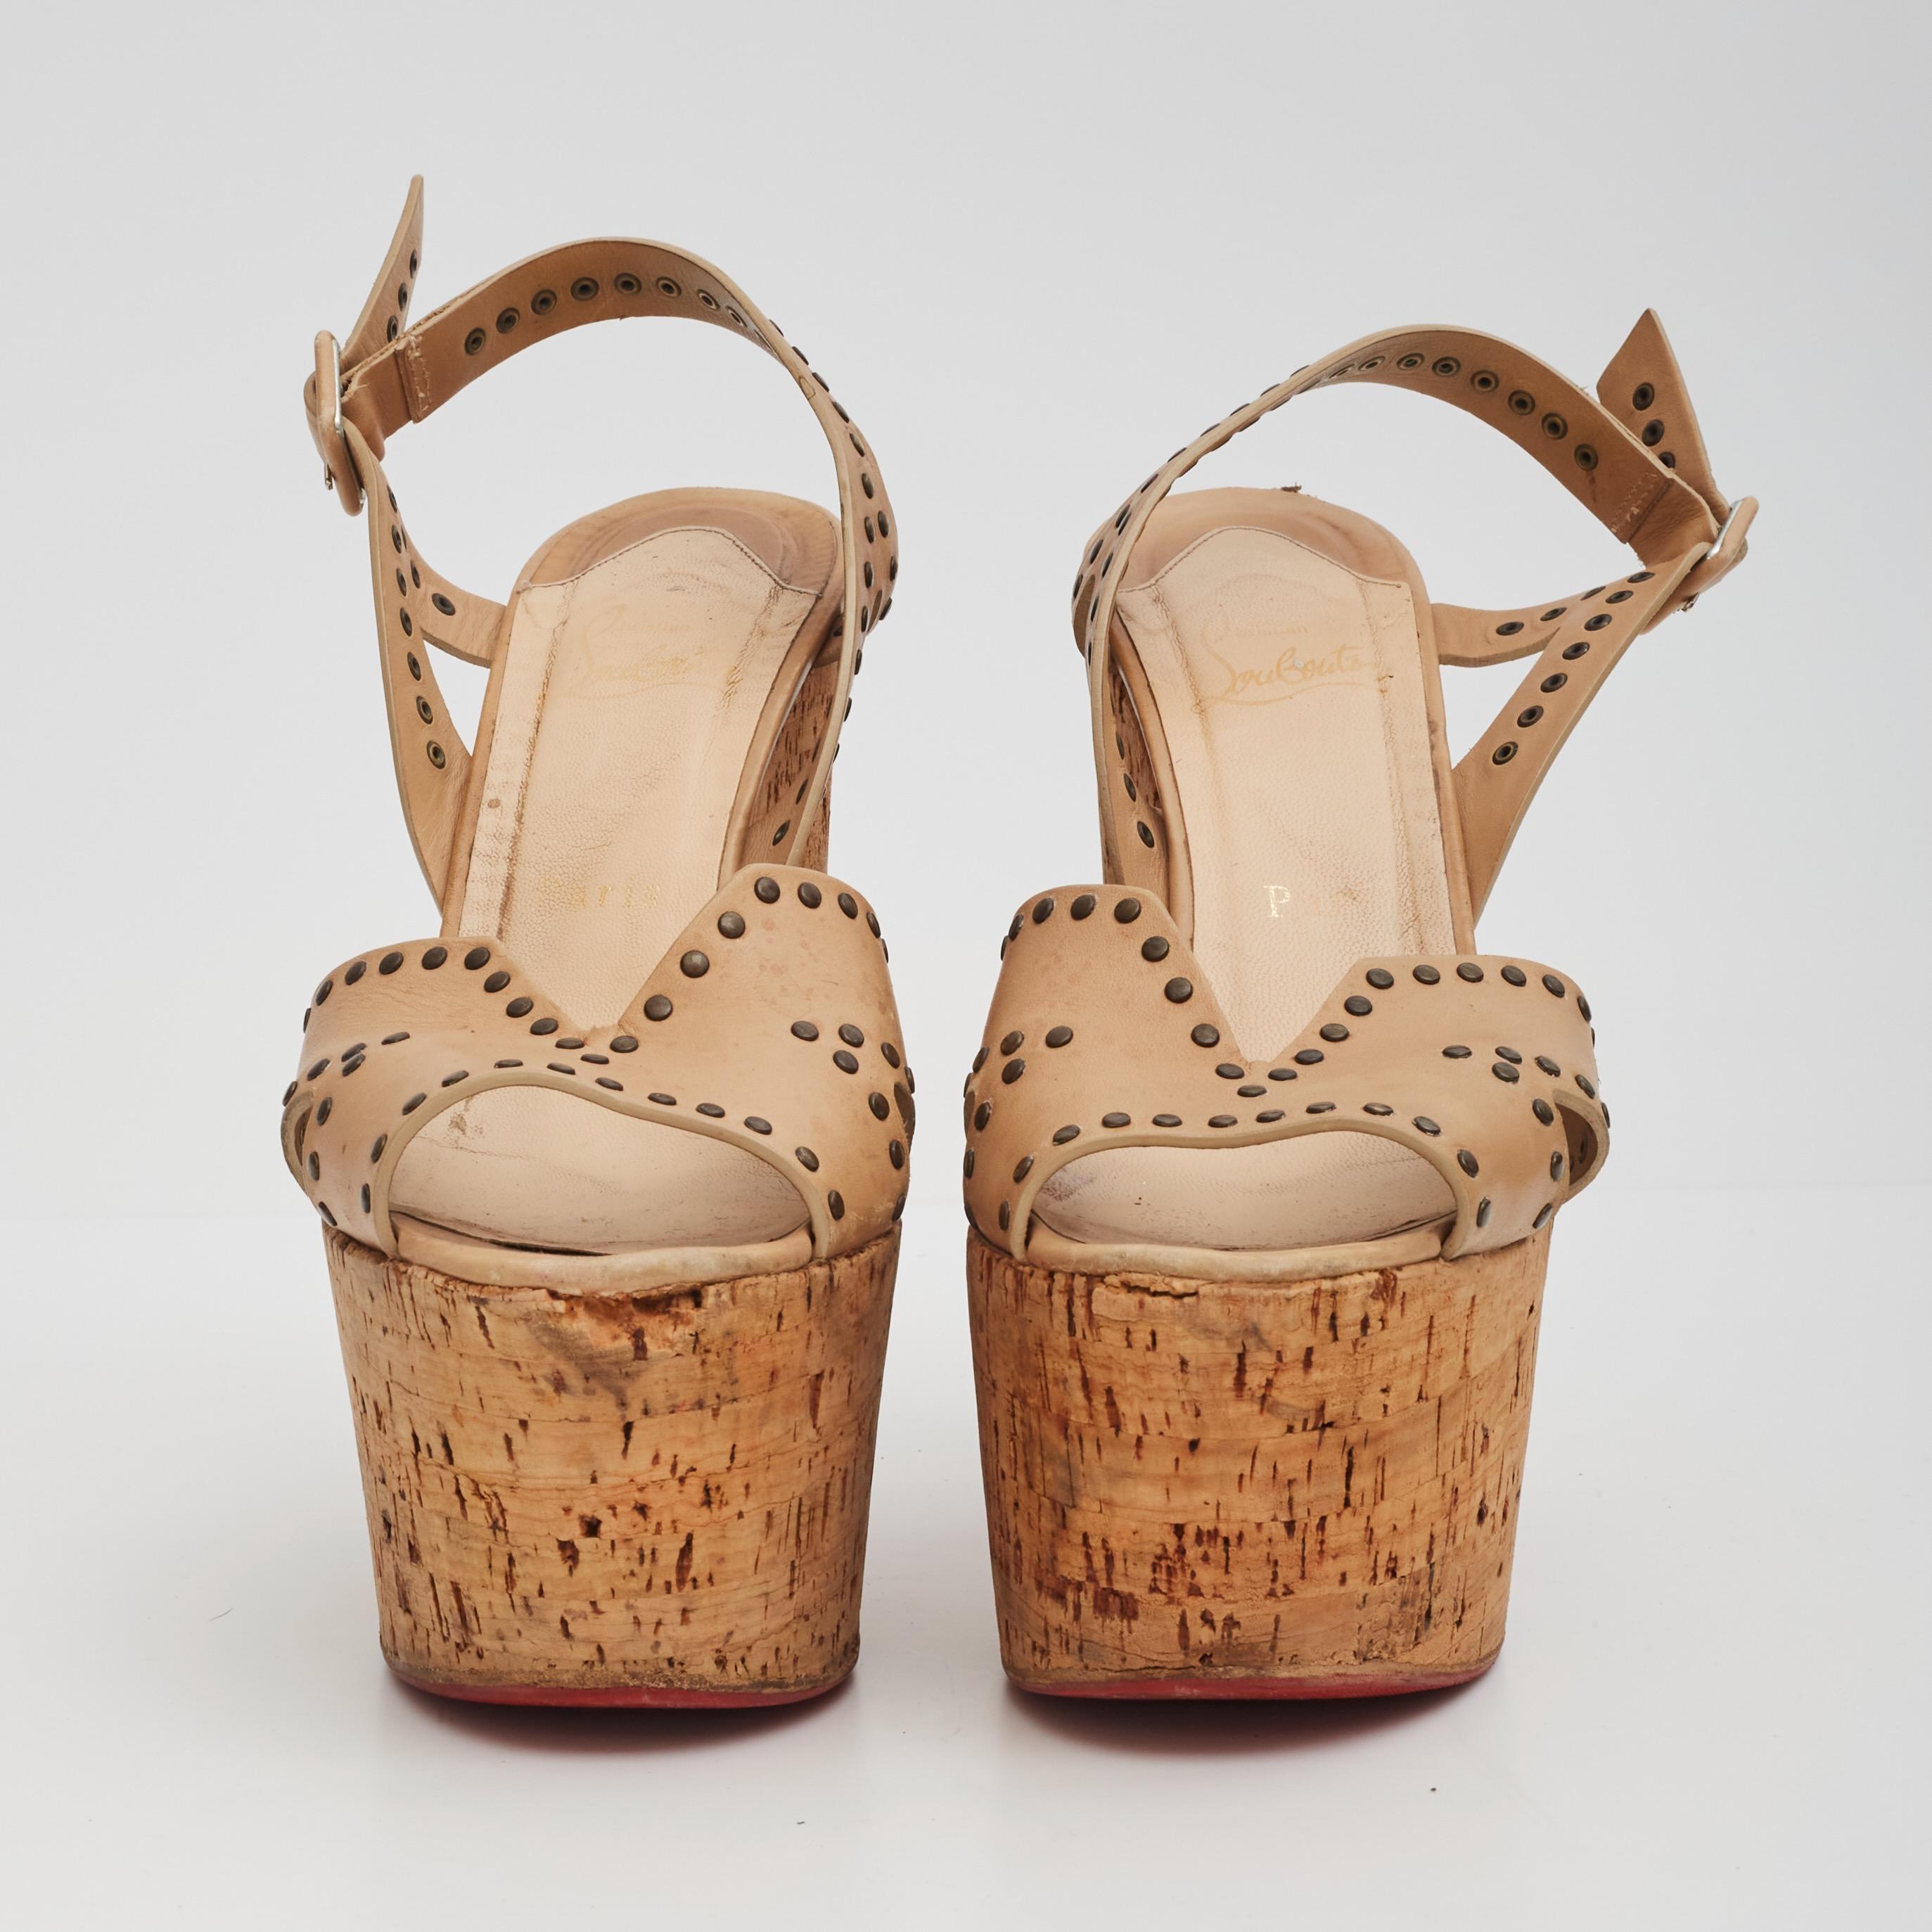 Color: Beige
Material: Cork wedge with leather studded straps
Size: 40 EU / 9 US
Heel Height: 140 mm / 5.5”
Platform Height: 63.2 mm / 2.5” 
Condition: Good. Wear includes scuffs, scrapes and stains to the outsoles. The tops show stains, marks and